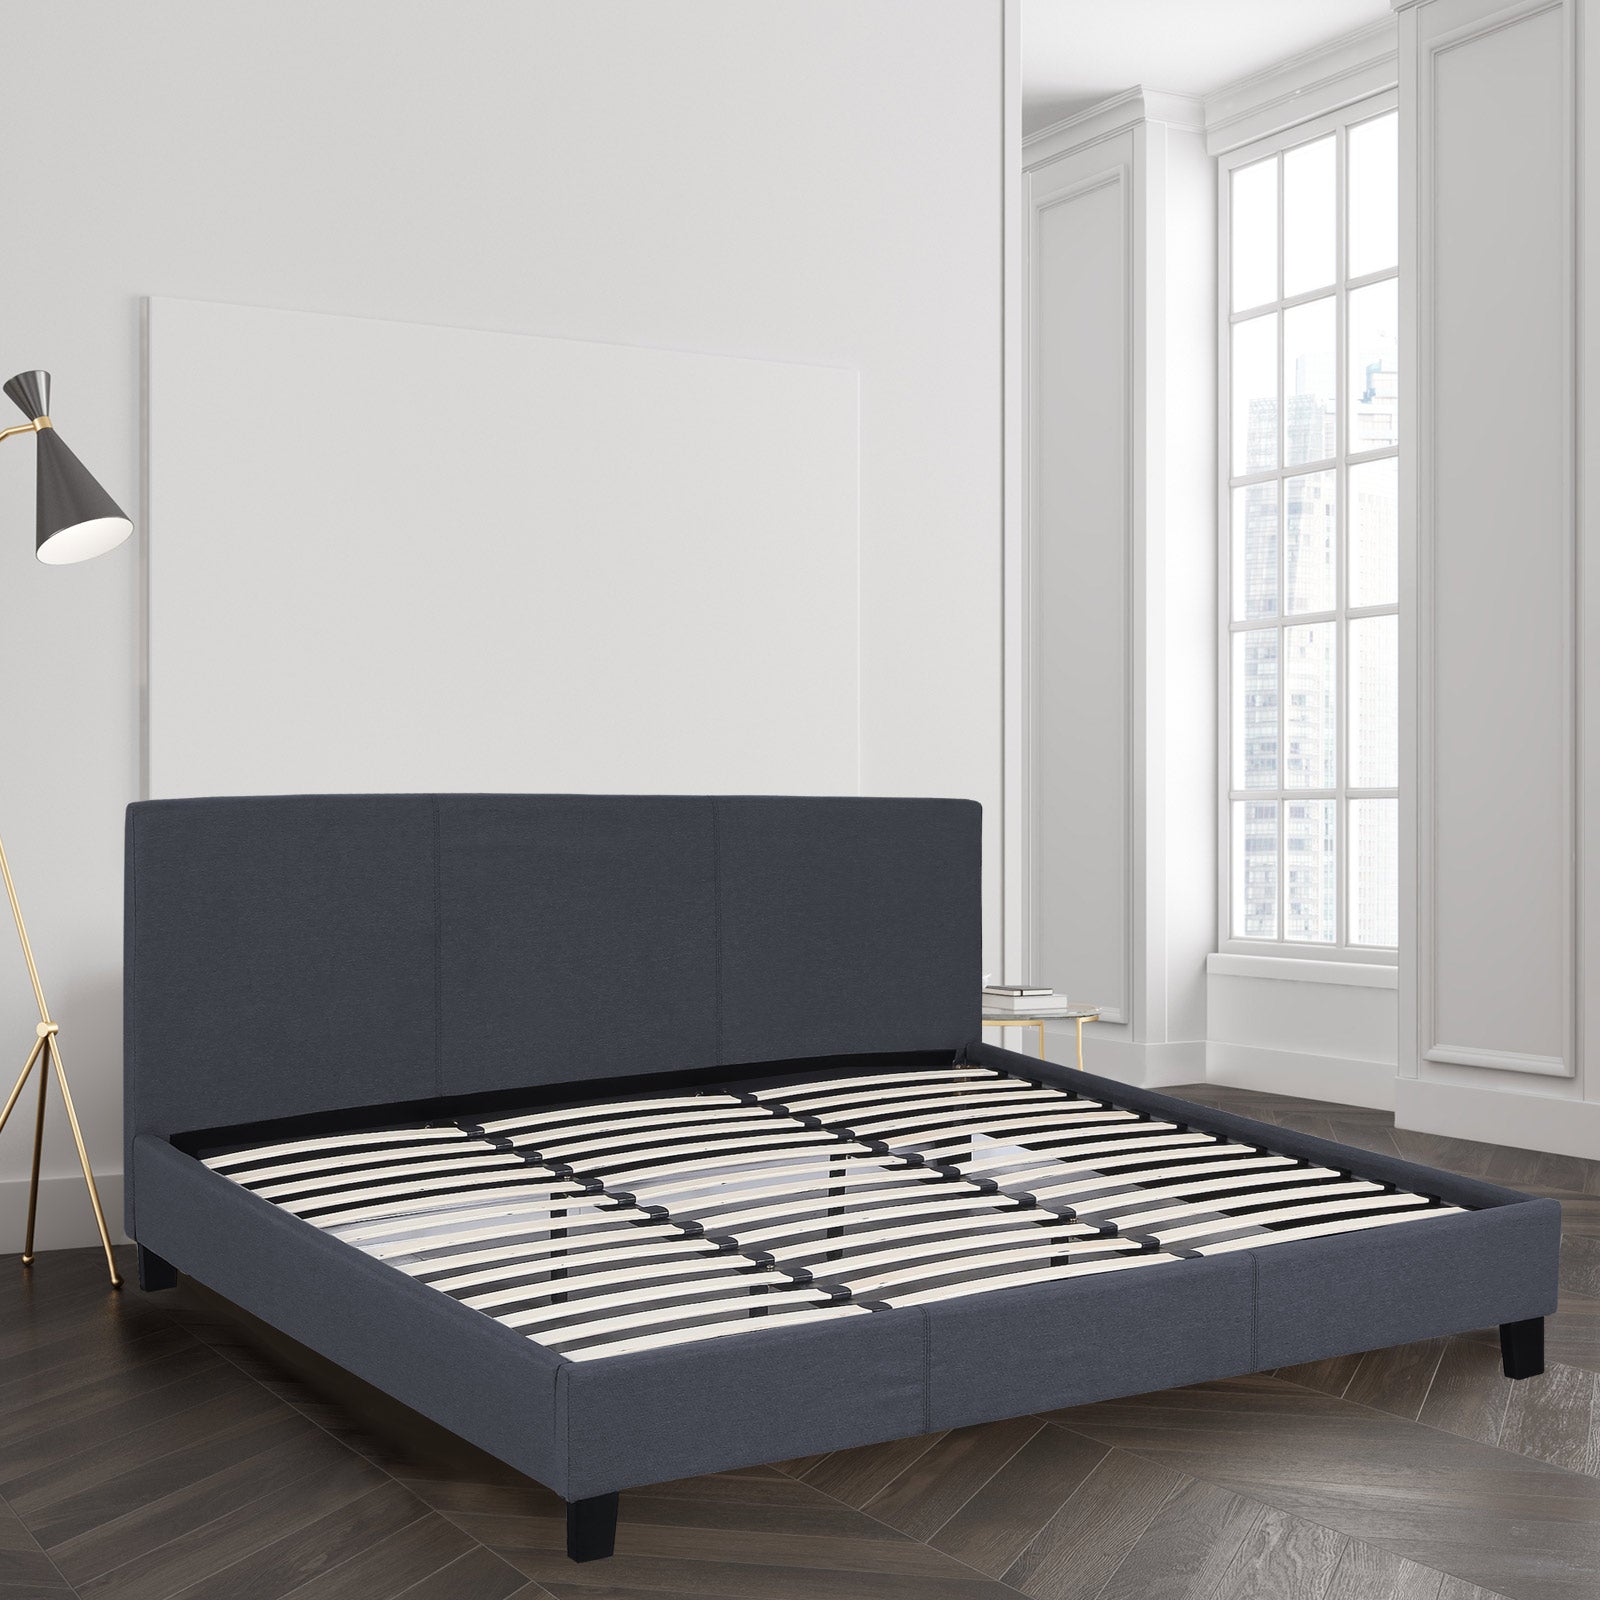 Milano Sienna Luxury Bed with Headboard (Model 2) - Charcoal No.35 - Double